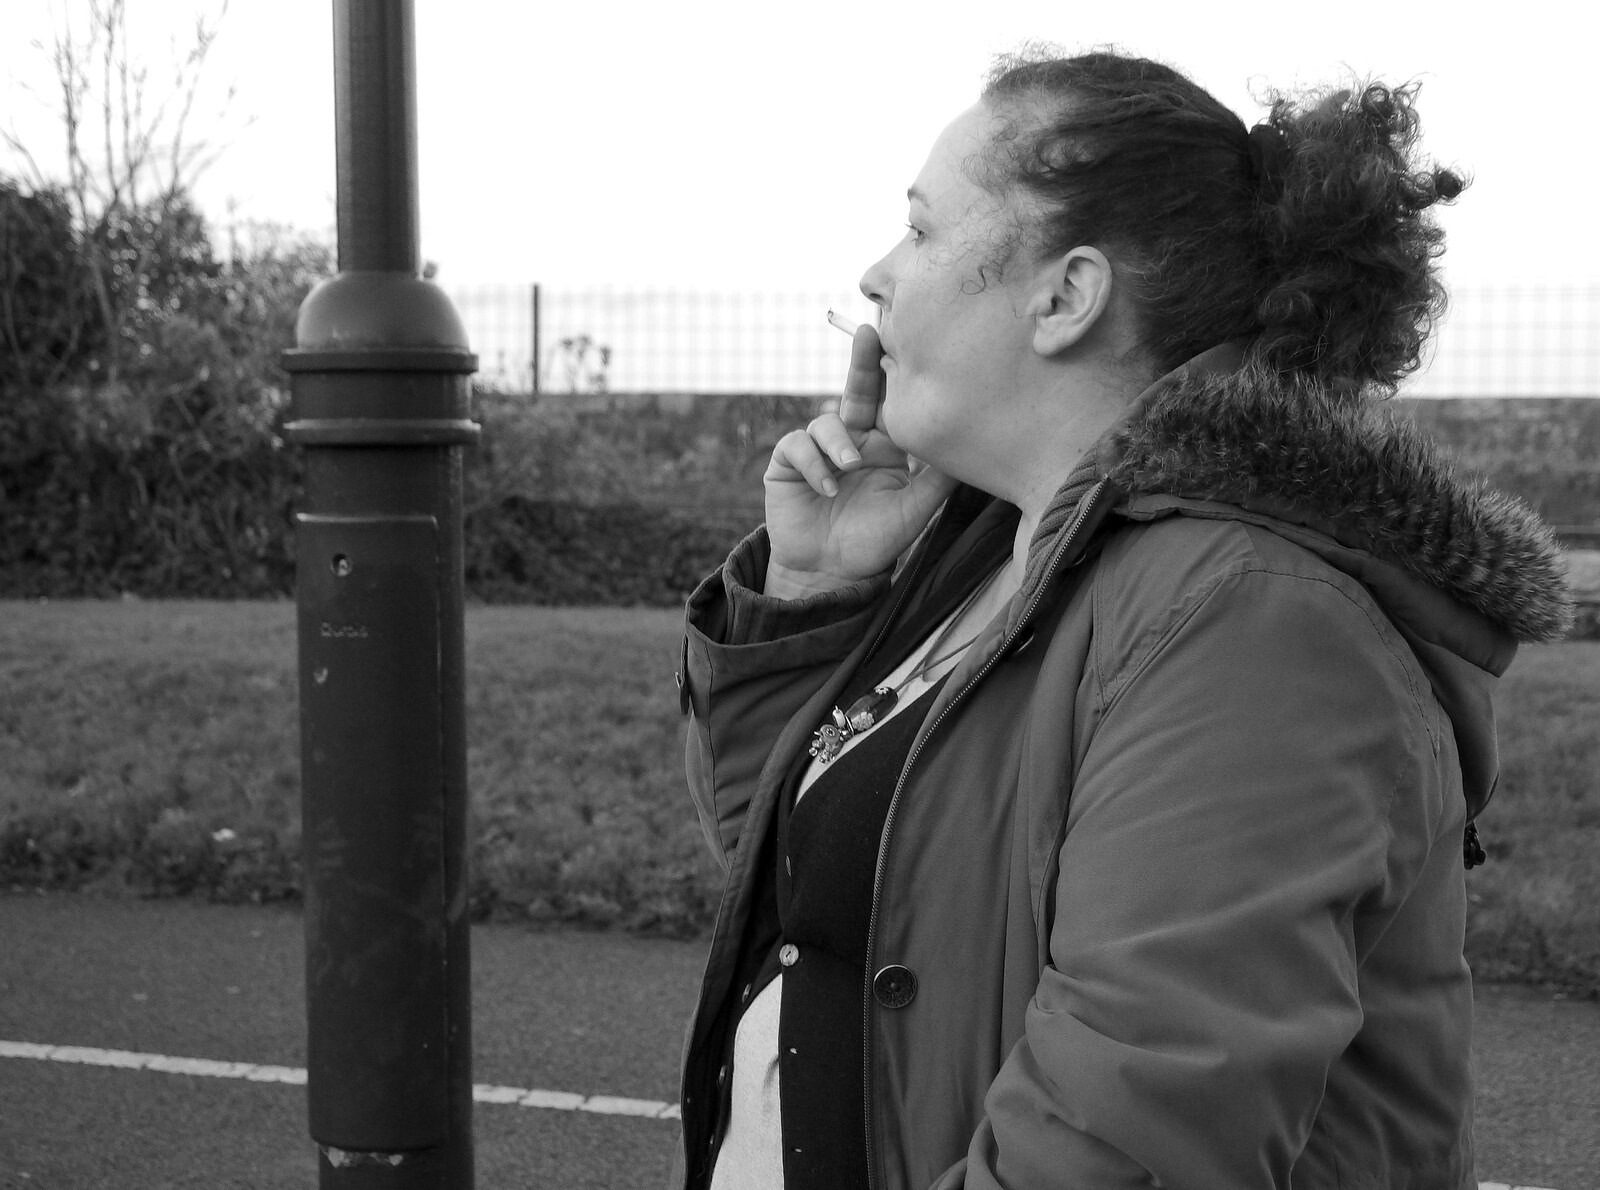 Louise with a fag on from Dun Laoghaire and an Electrical Disaster, Monkstown, County Dublin, Ireland - 4th January 2014